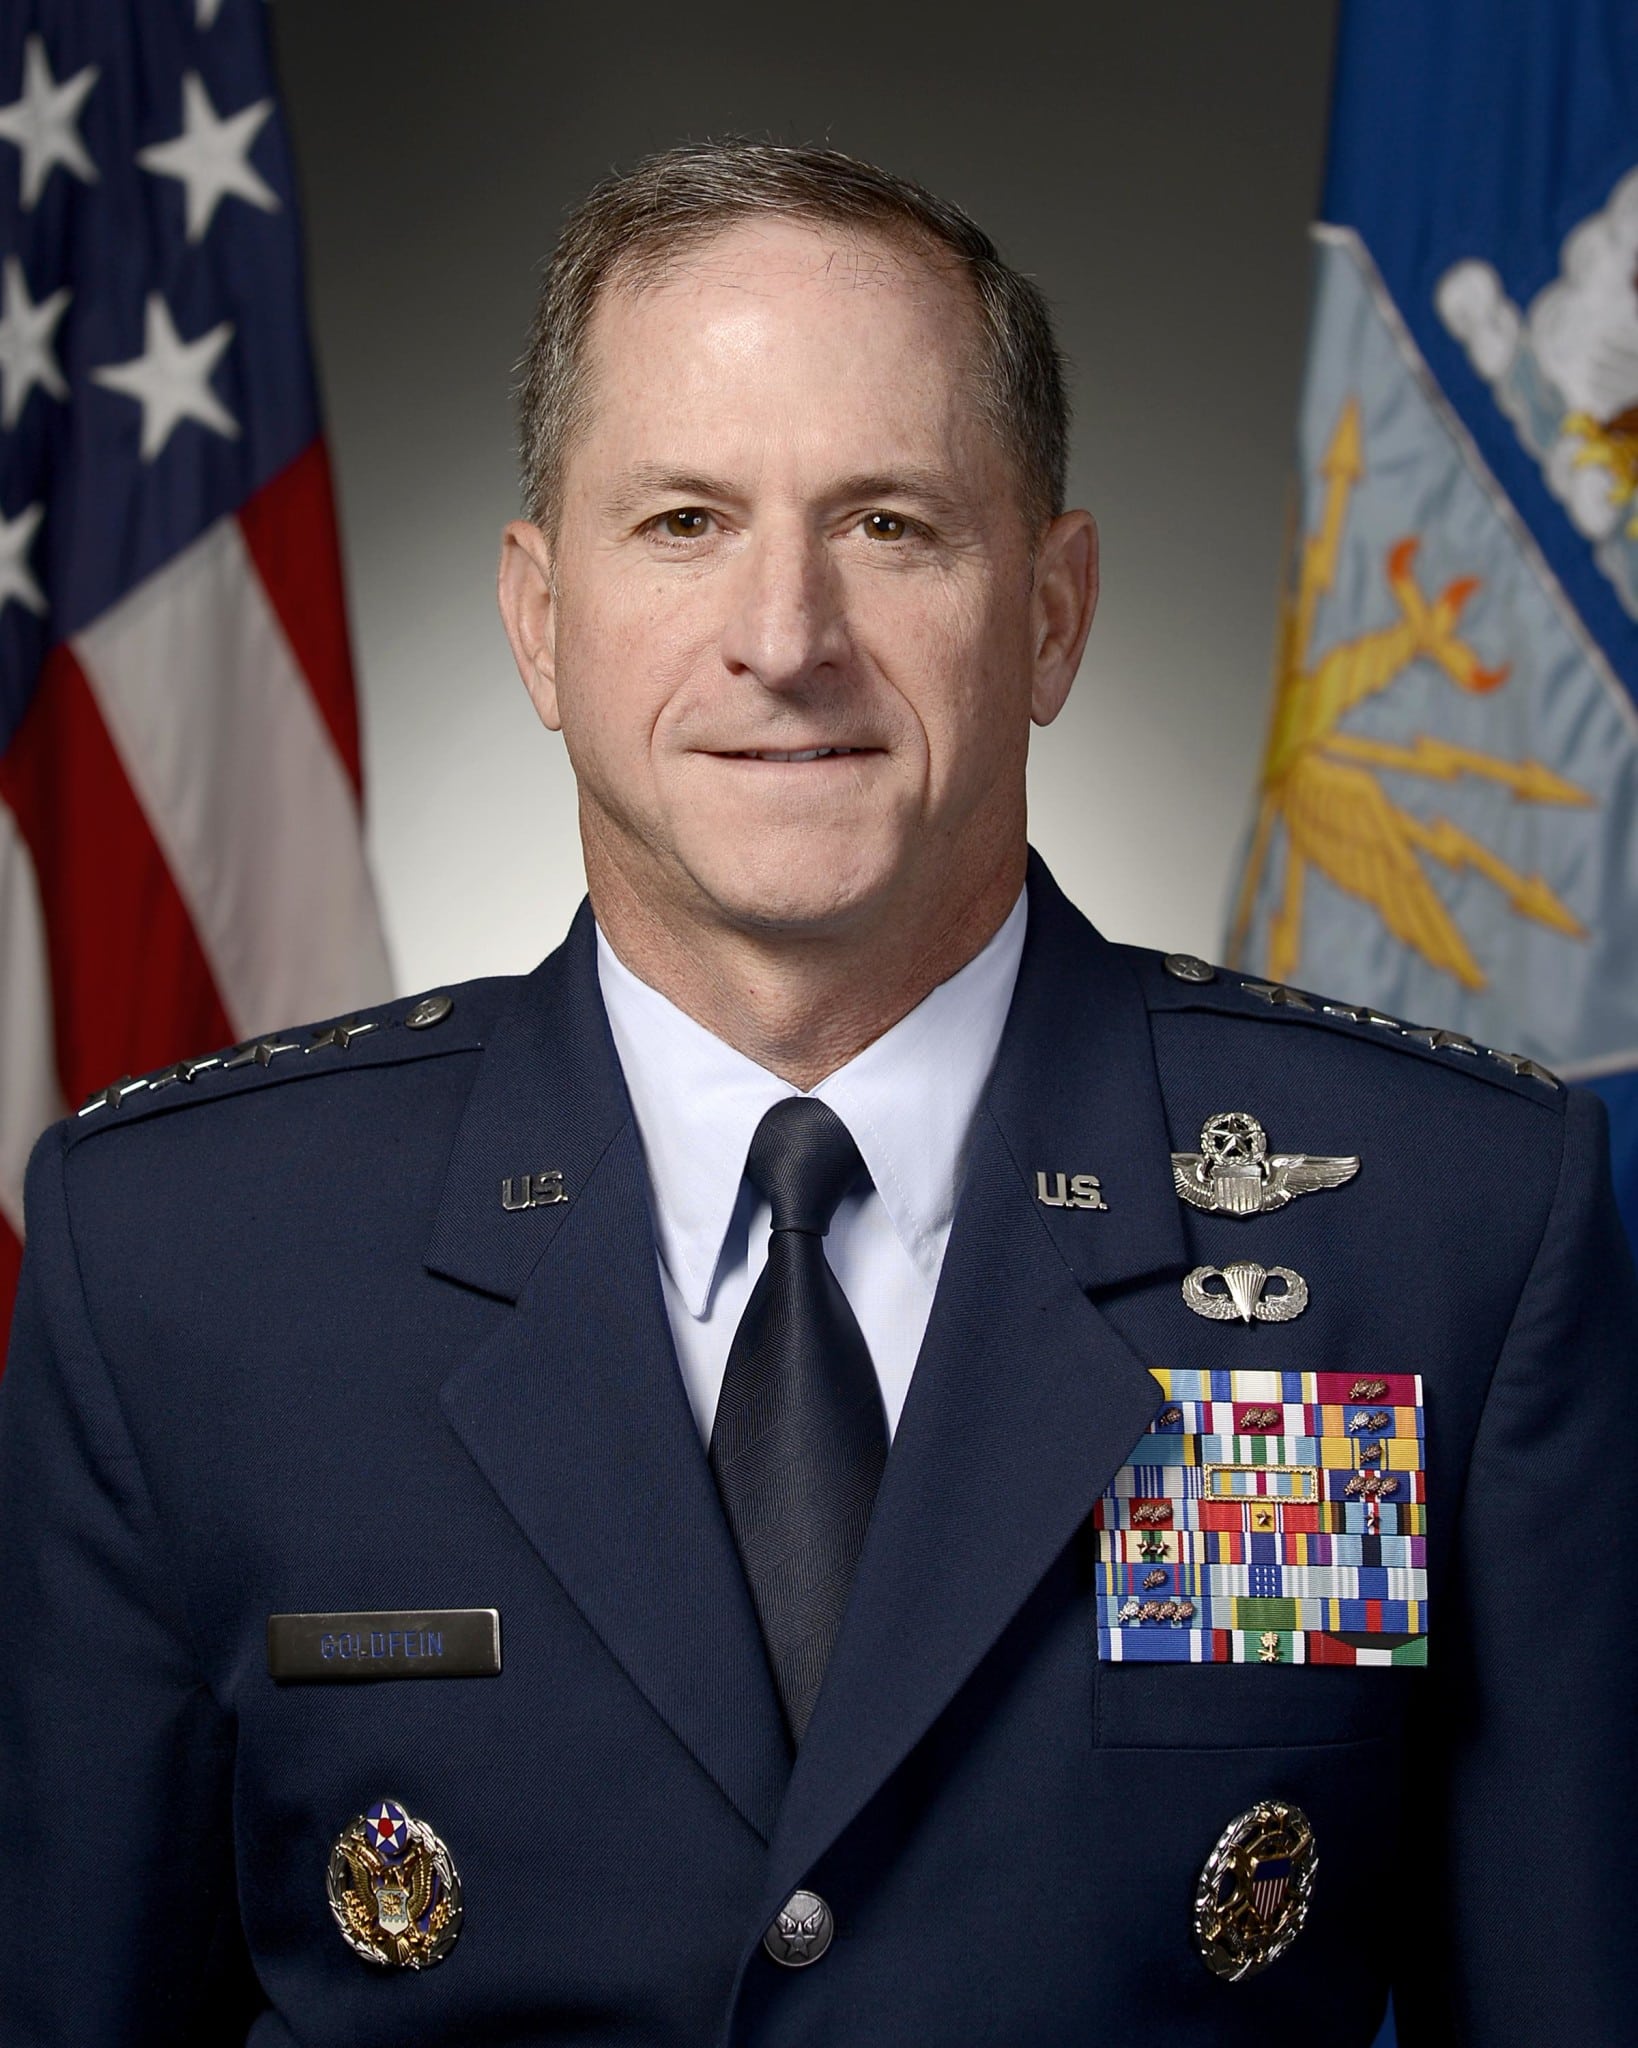 Obama Taps Goldfein As Next Air Force Chief Of Staff - Defense Daily